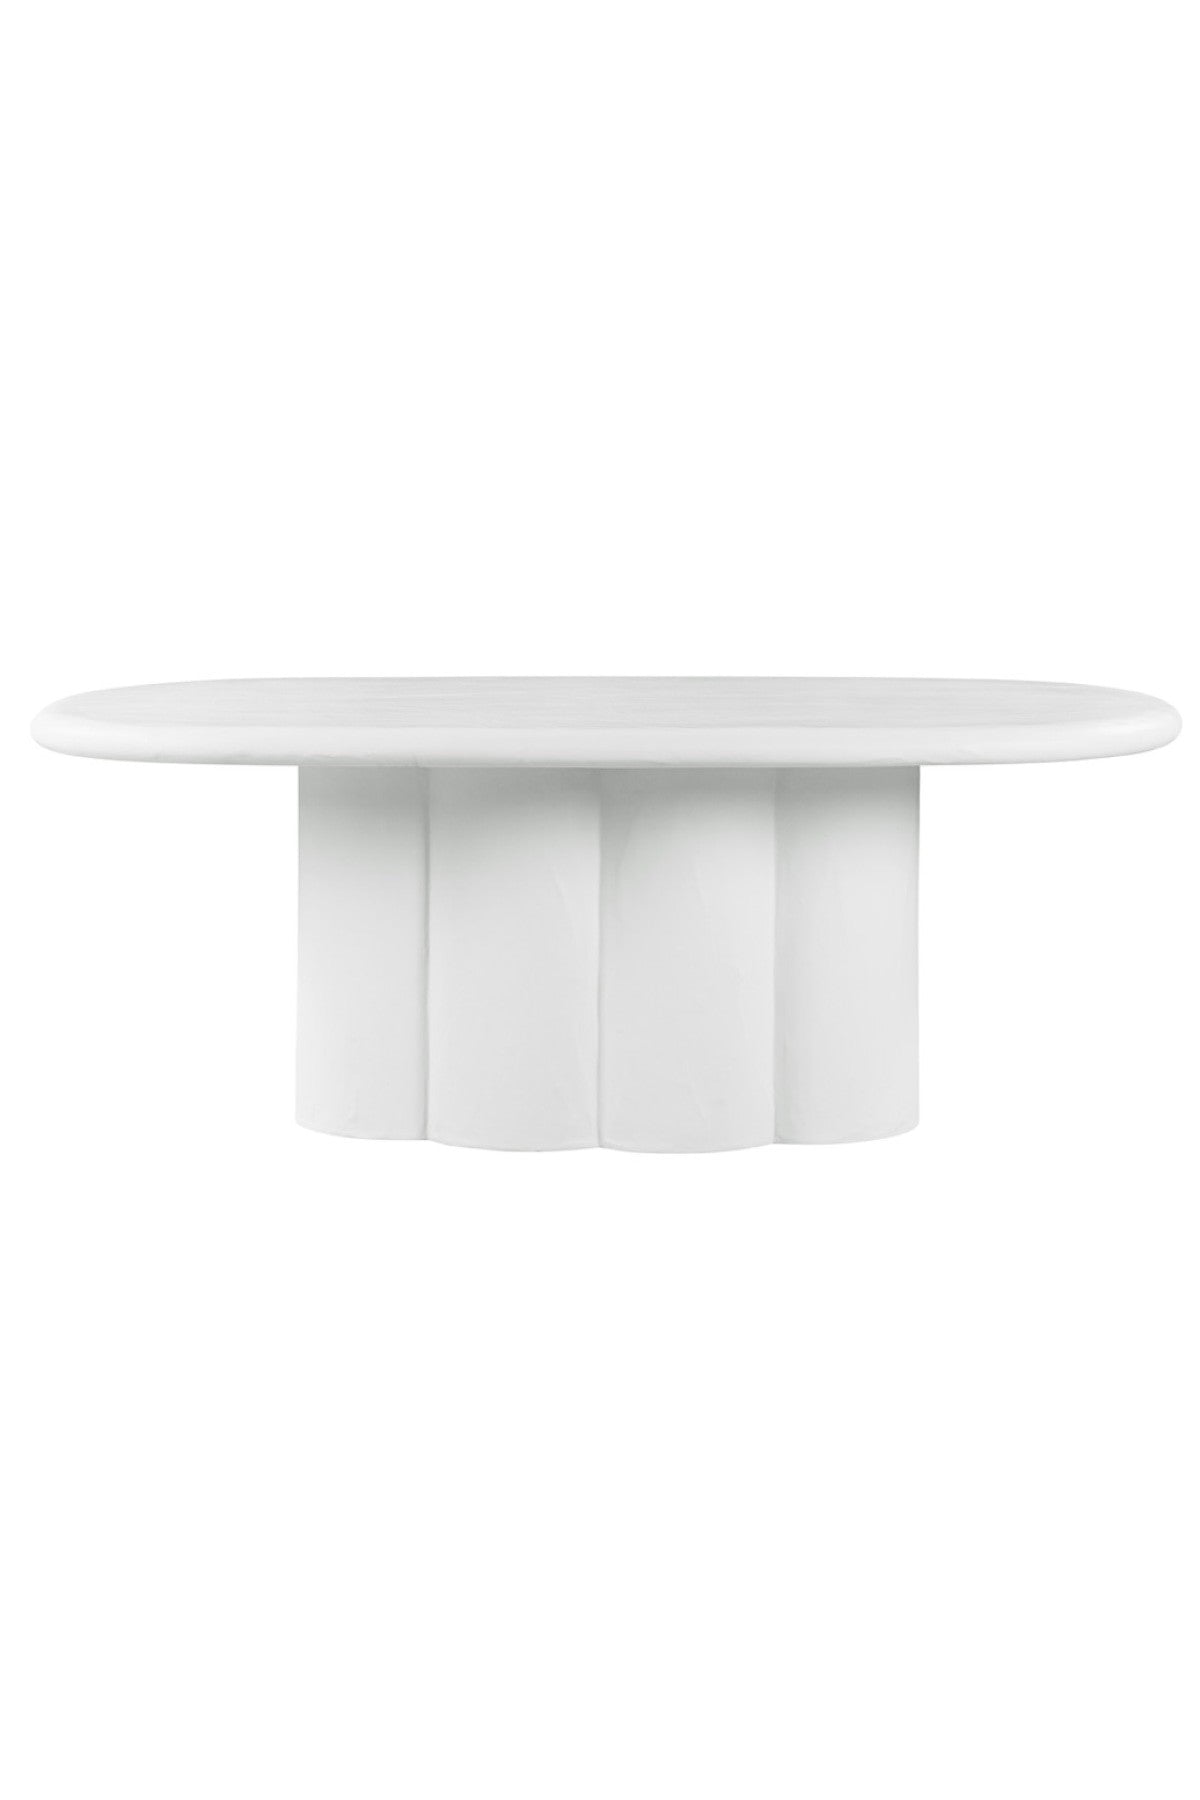 Lariat Dining Table - White